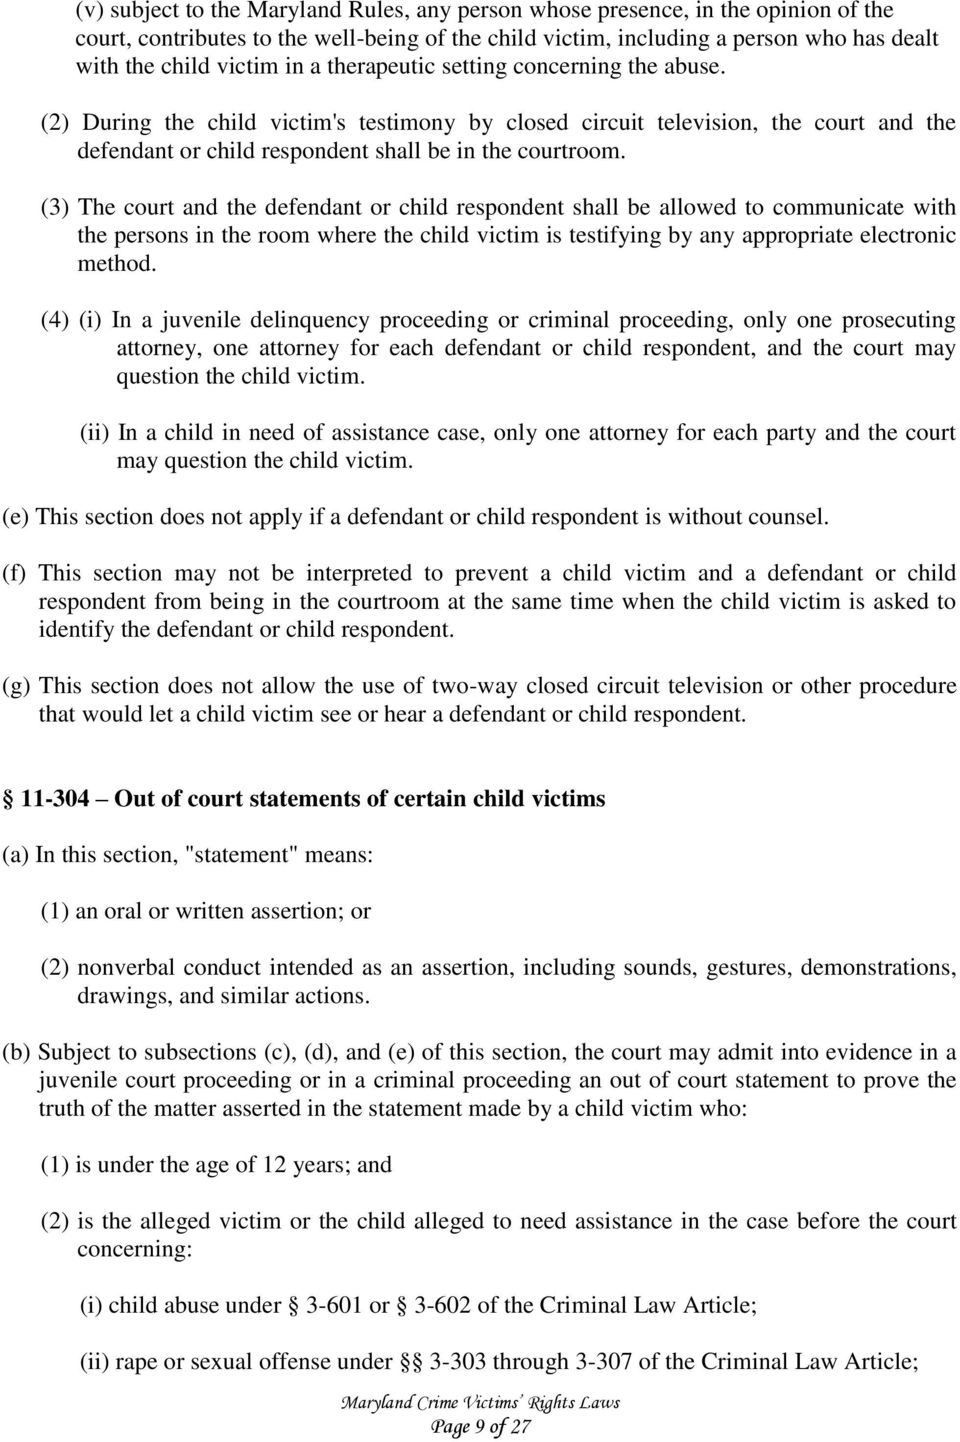 (3) The court and the defendant or child respondent shall be allowed to communicate with the persons in the room where the child victim is testifying by any appropriate electronic method.